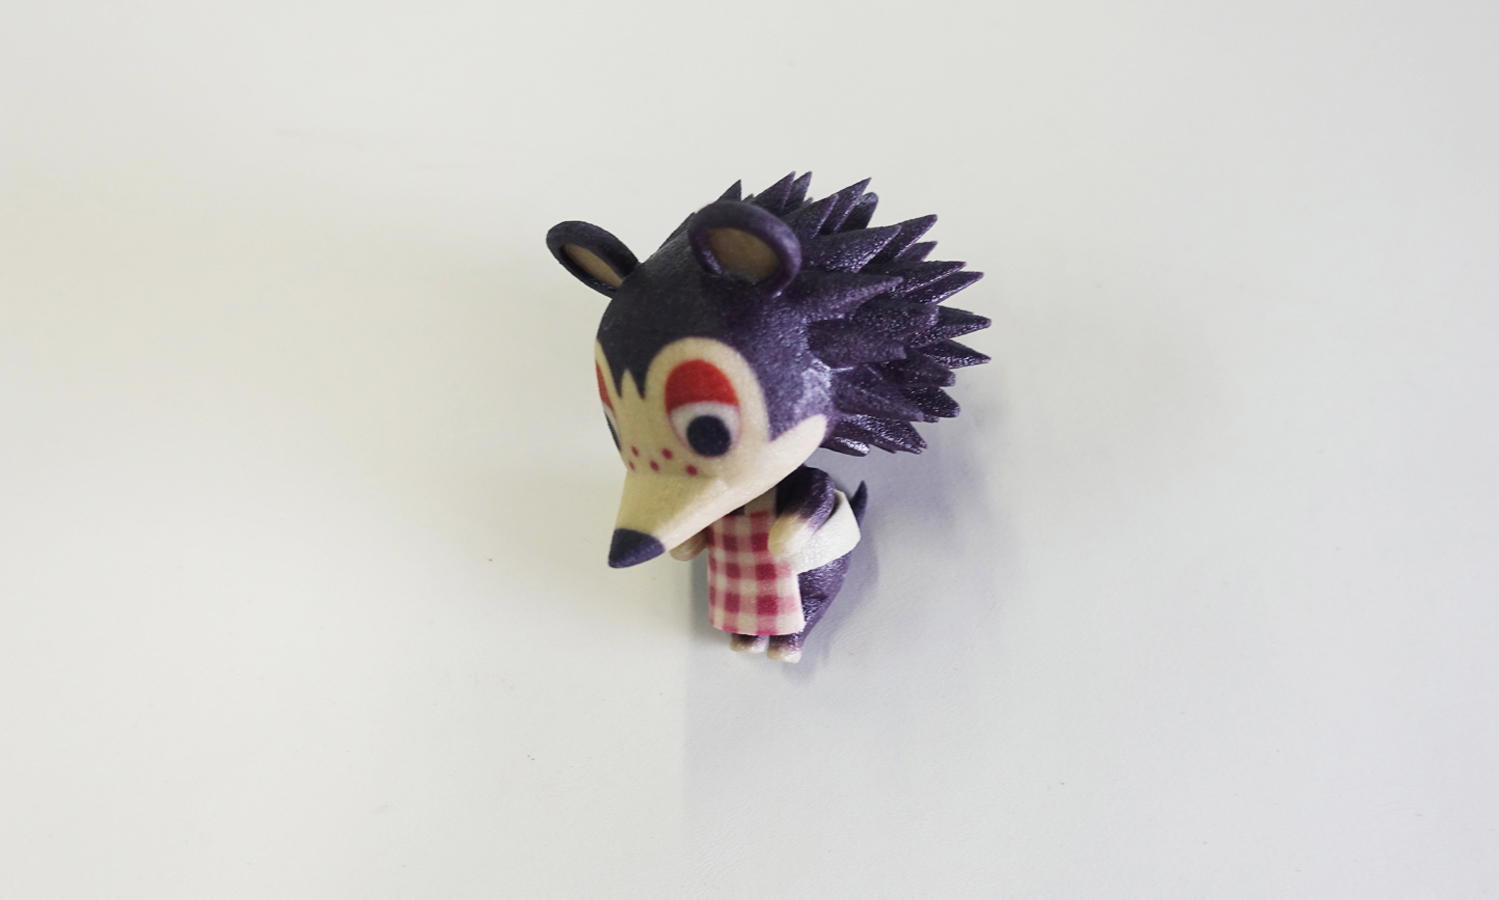 ColorJet 3D Printed Animal Crossing Villager Sable the Hedgehog Sandstone  Statue - FacFox